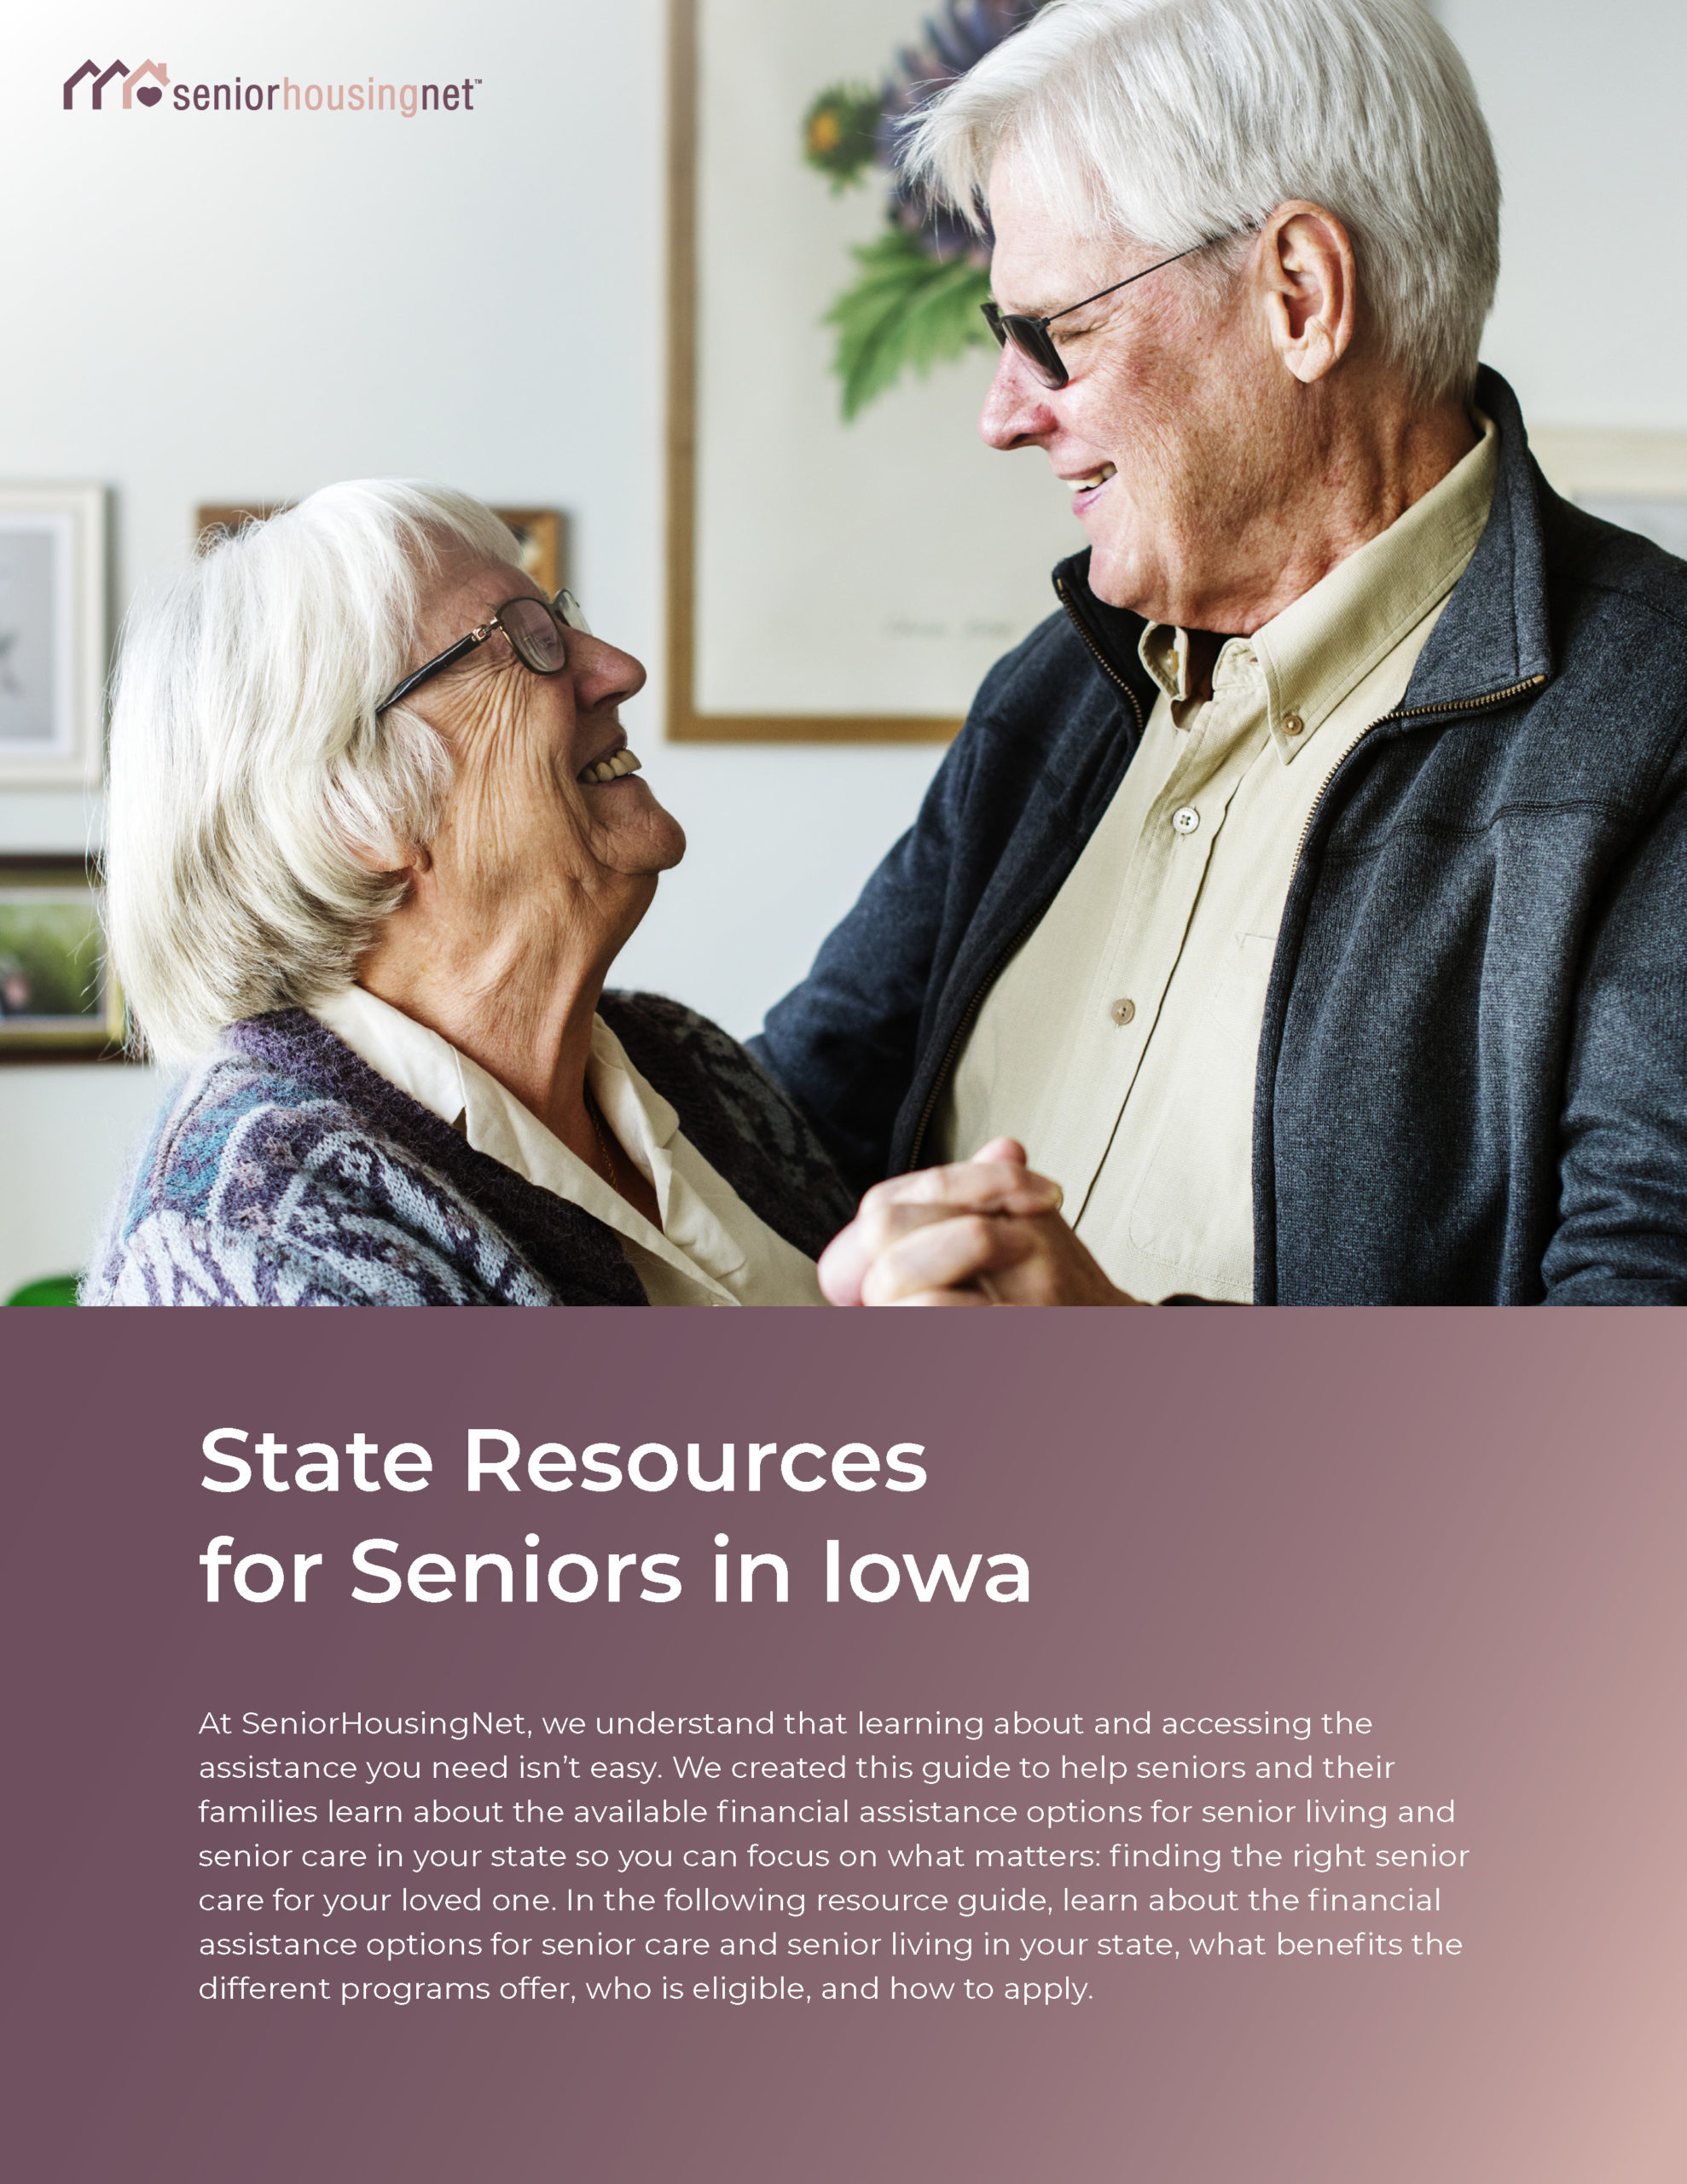 State Resources for Seniors in Iowa